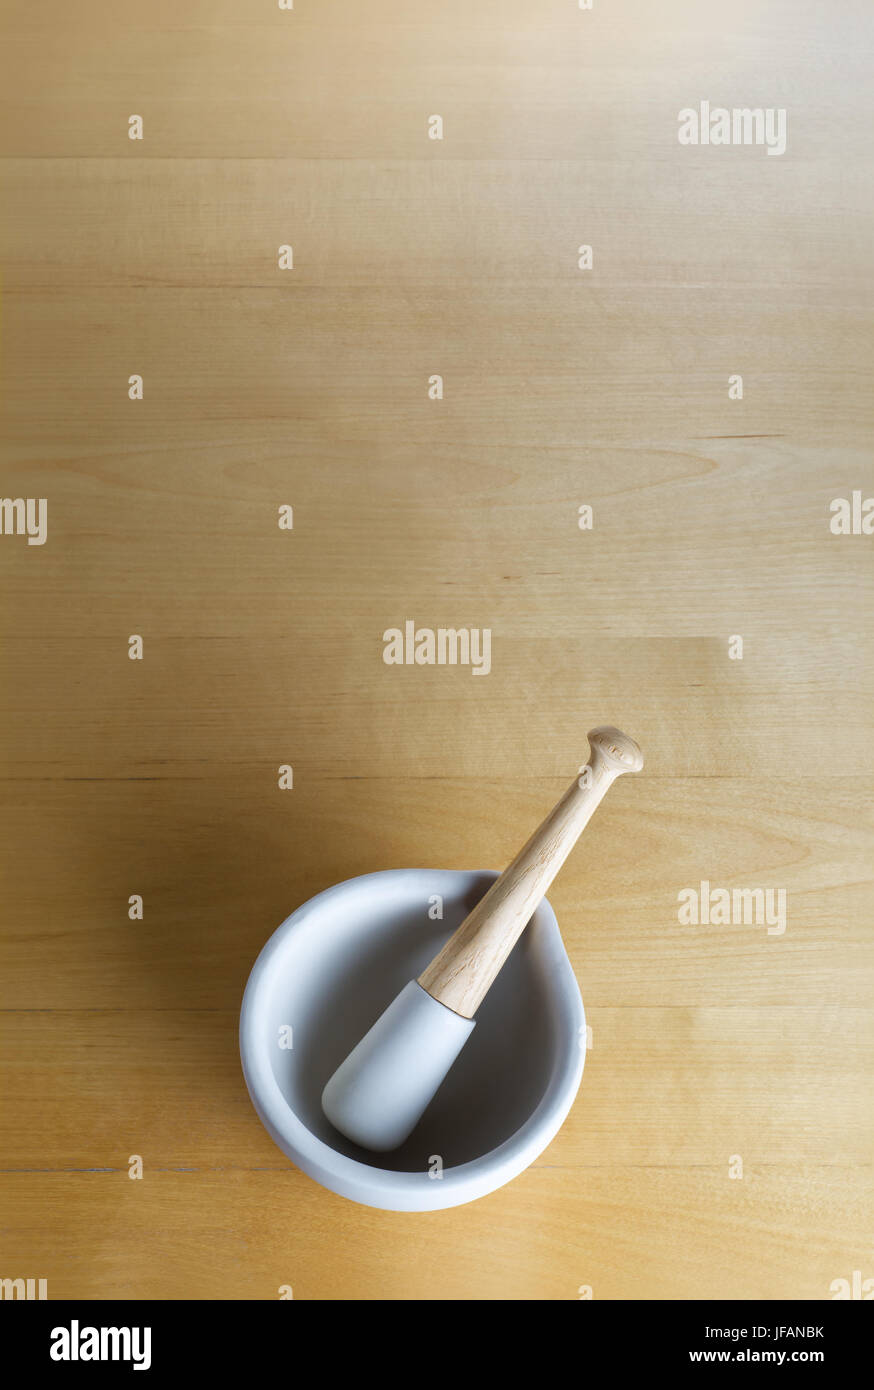 overhead shot of a pestle and mortar, centred lower frame on a wooden surface which provides generous copy space above. Stock Photo